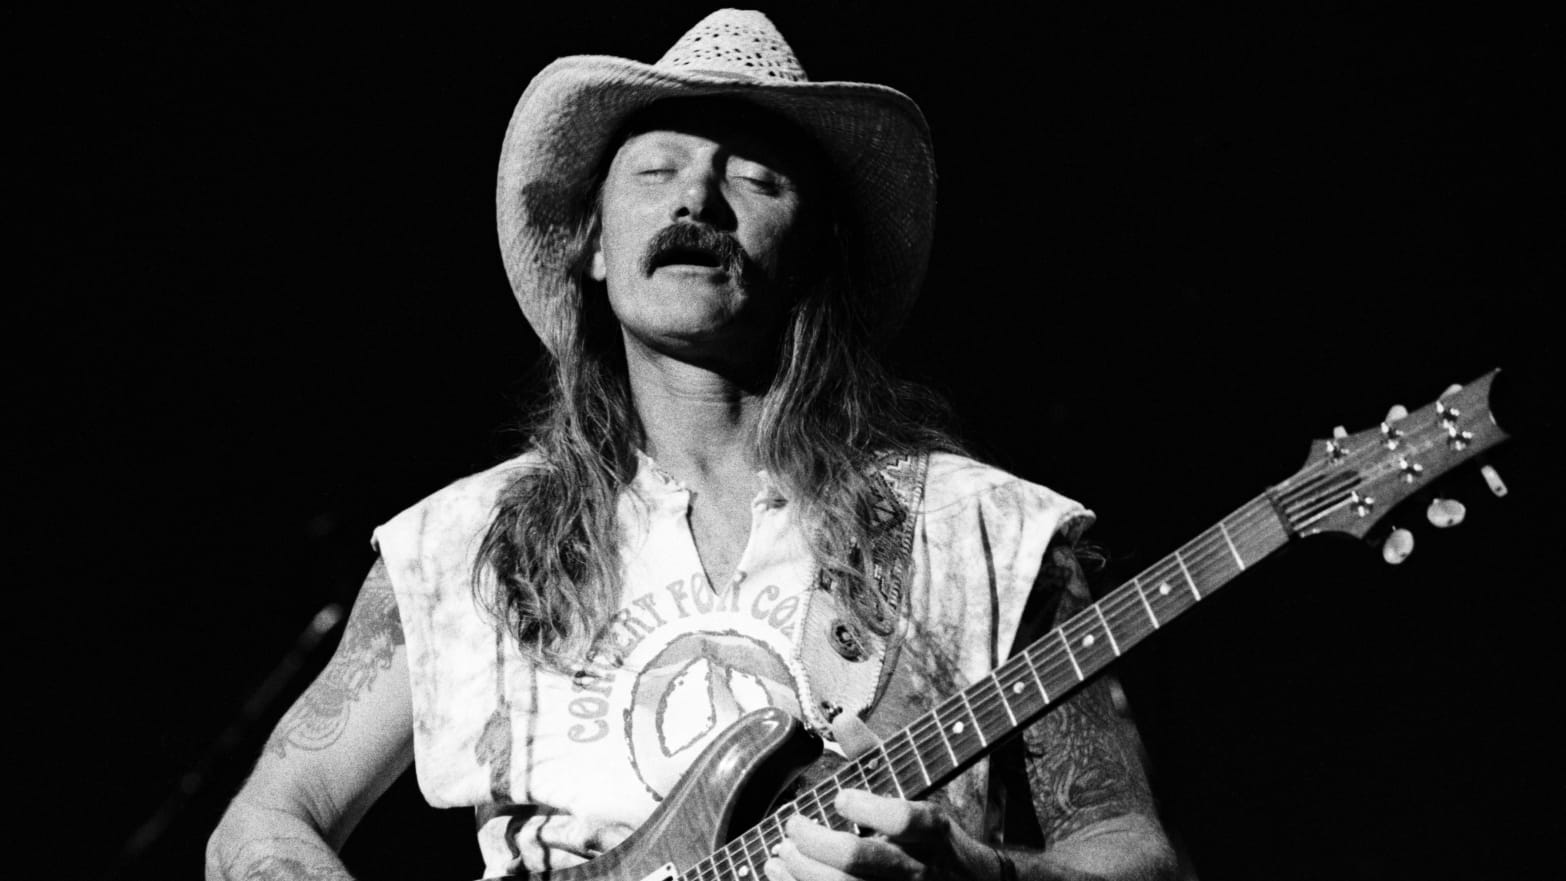 Allman Brothers Band Guitar Legend Dickey Betts Passes Away at 80